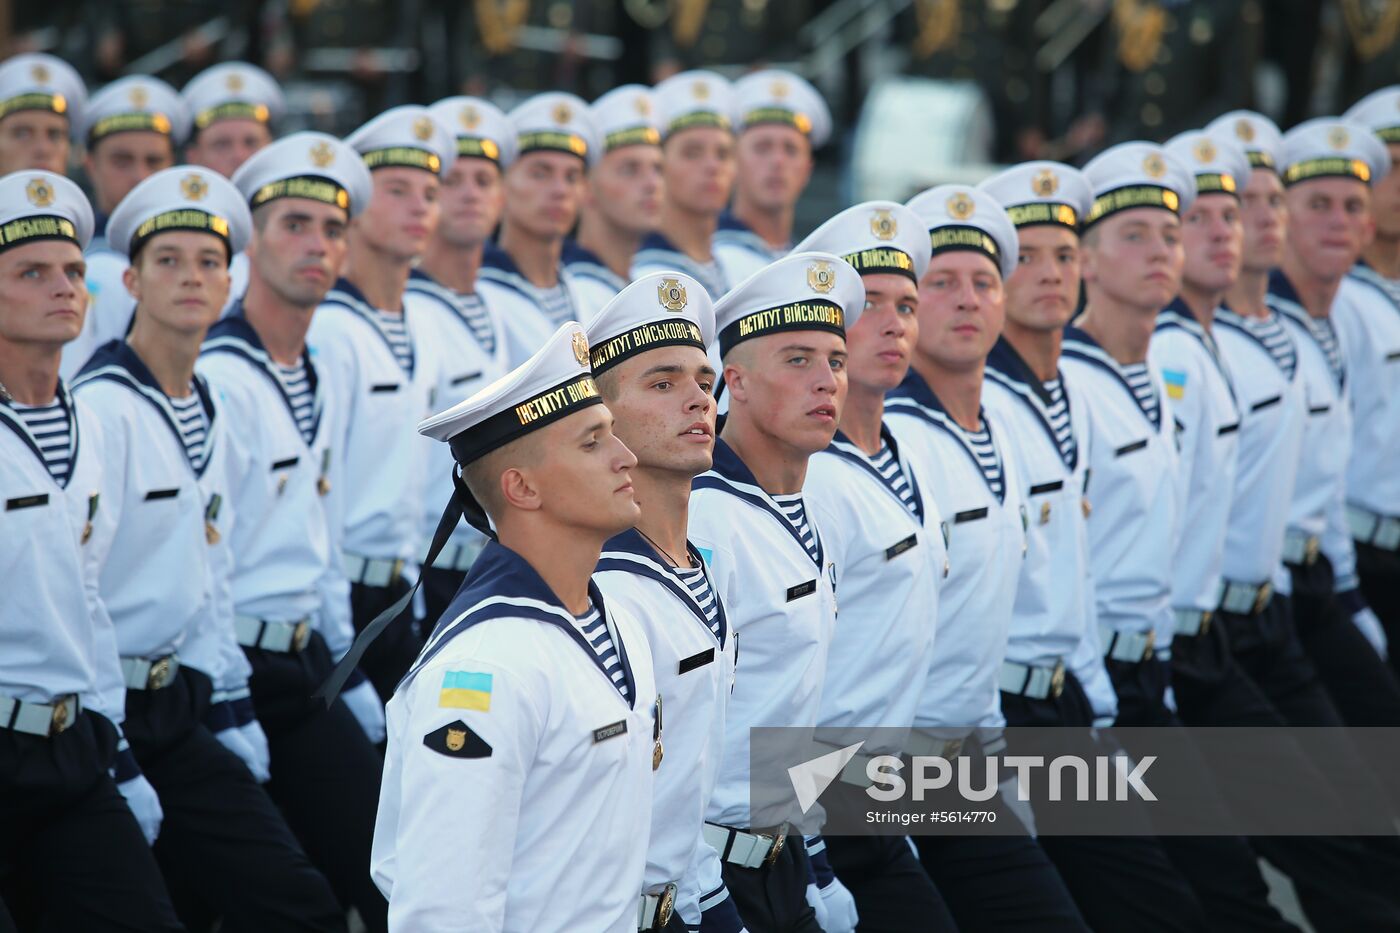 General rehearsal of military parade to mark Ukraine's Independence Day